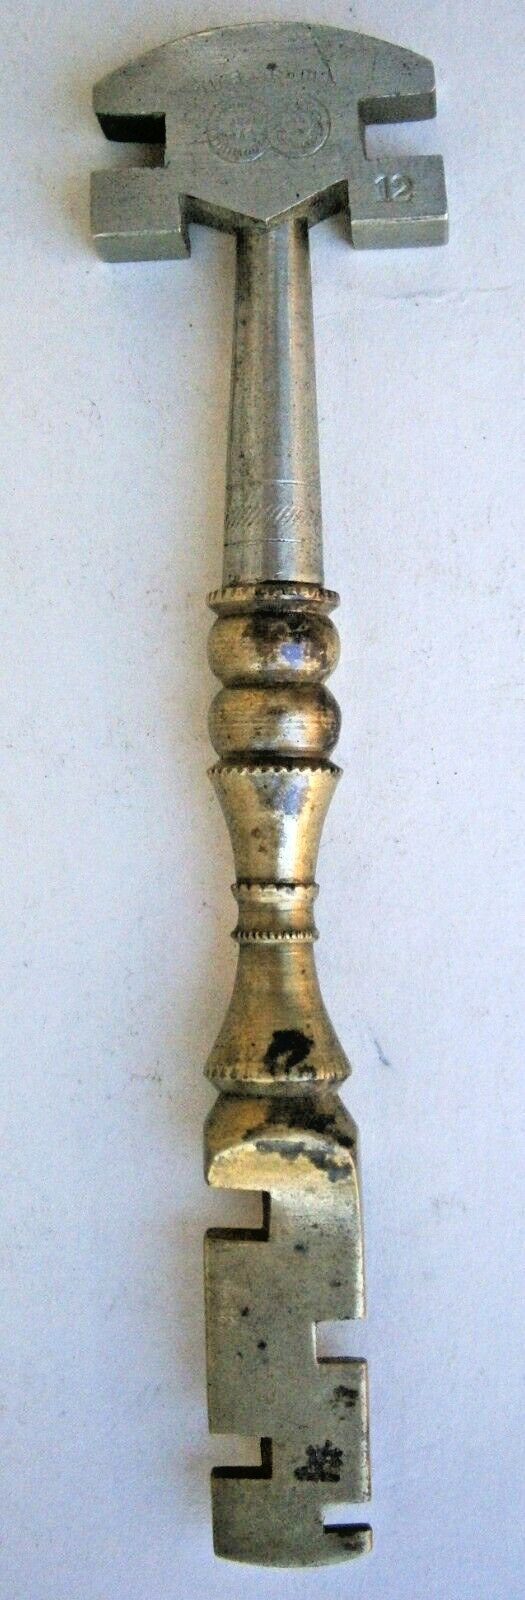 Unusual Vintage Well Crafted Russian Gauge Tool probably from the early 1900's